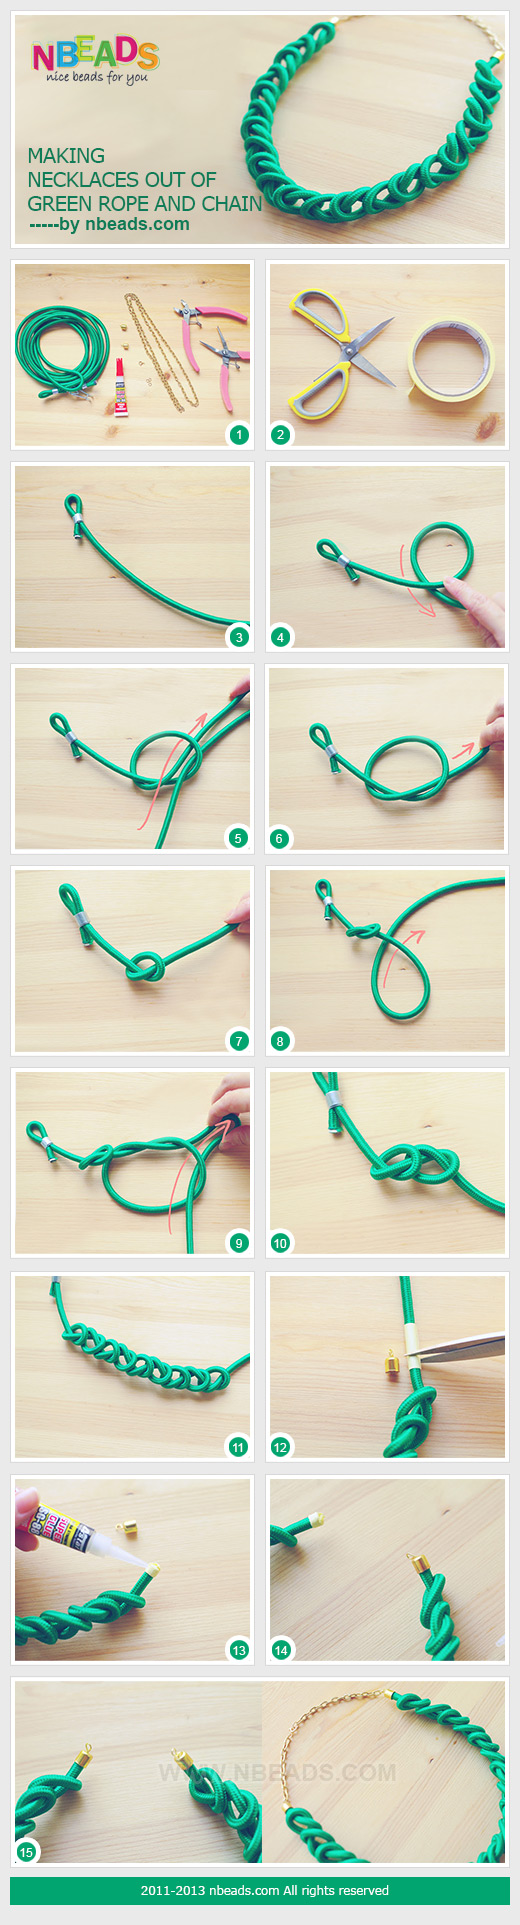 making necklaces out of green rope and chain